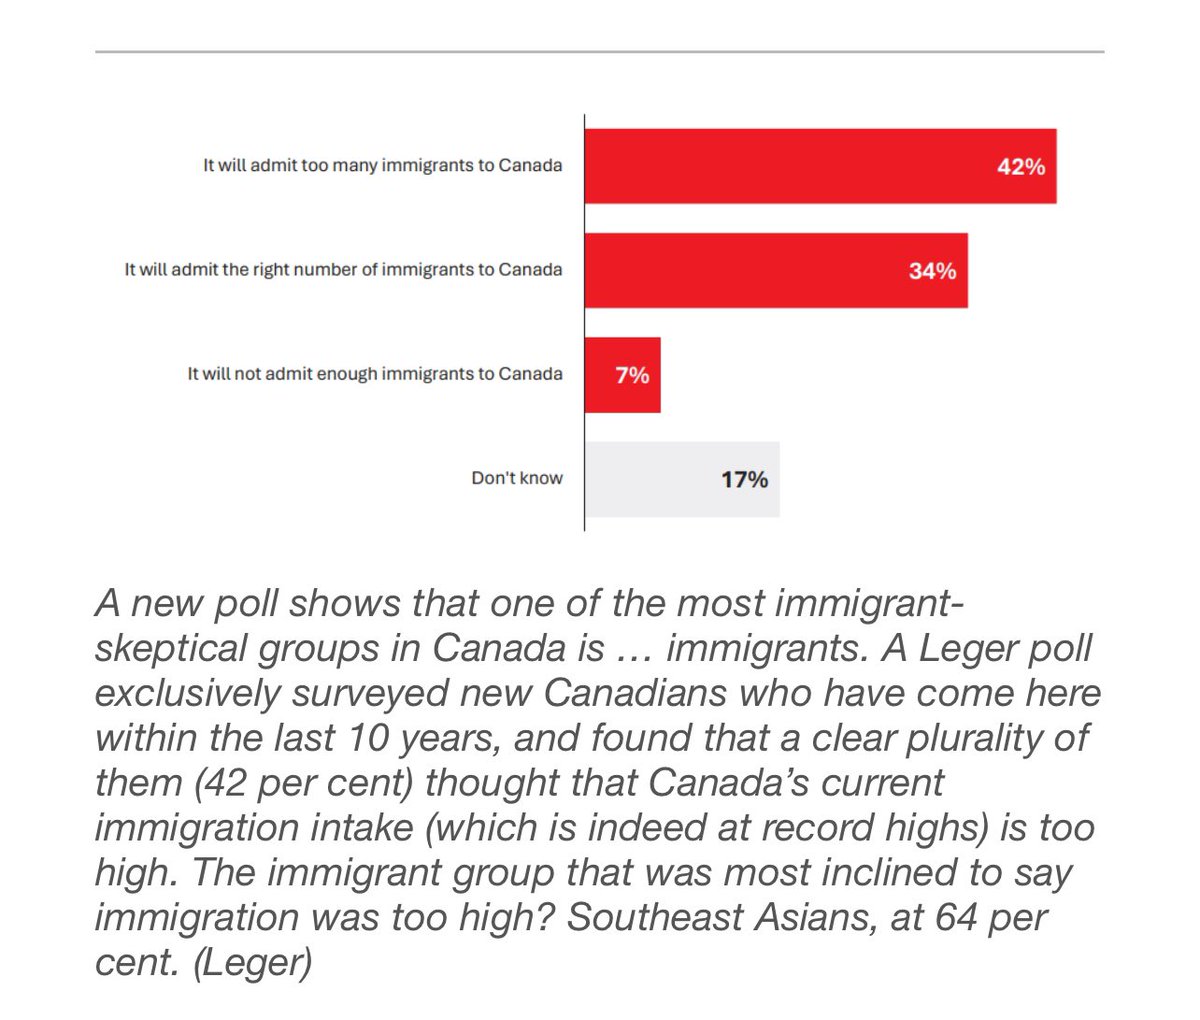 Contrary to what many believe, immigrants in Canada do not all support mass immigration. A plurality, 42%, believe Canada admits too many immigrants, while only 7% think not enough, and 34% just the right number. Legitimate immigrants come to Canada because THEY WANT TO